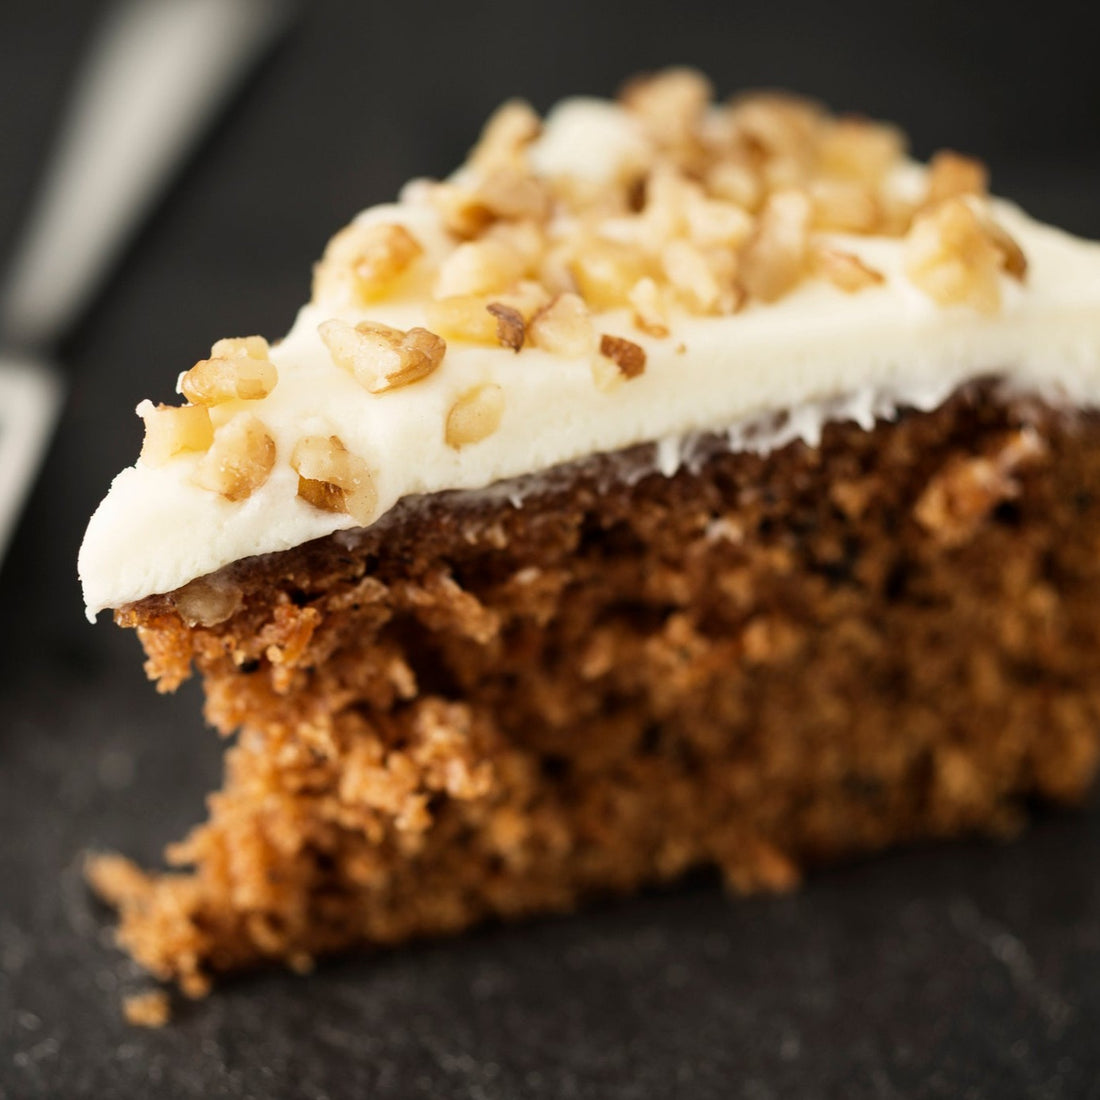 Frozen - Carrot Cake w/Cream Cheese Frosting